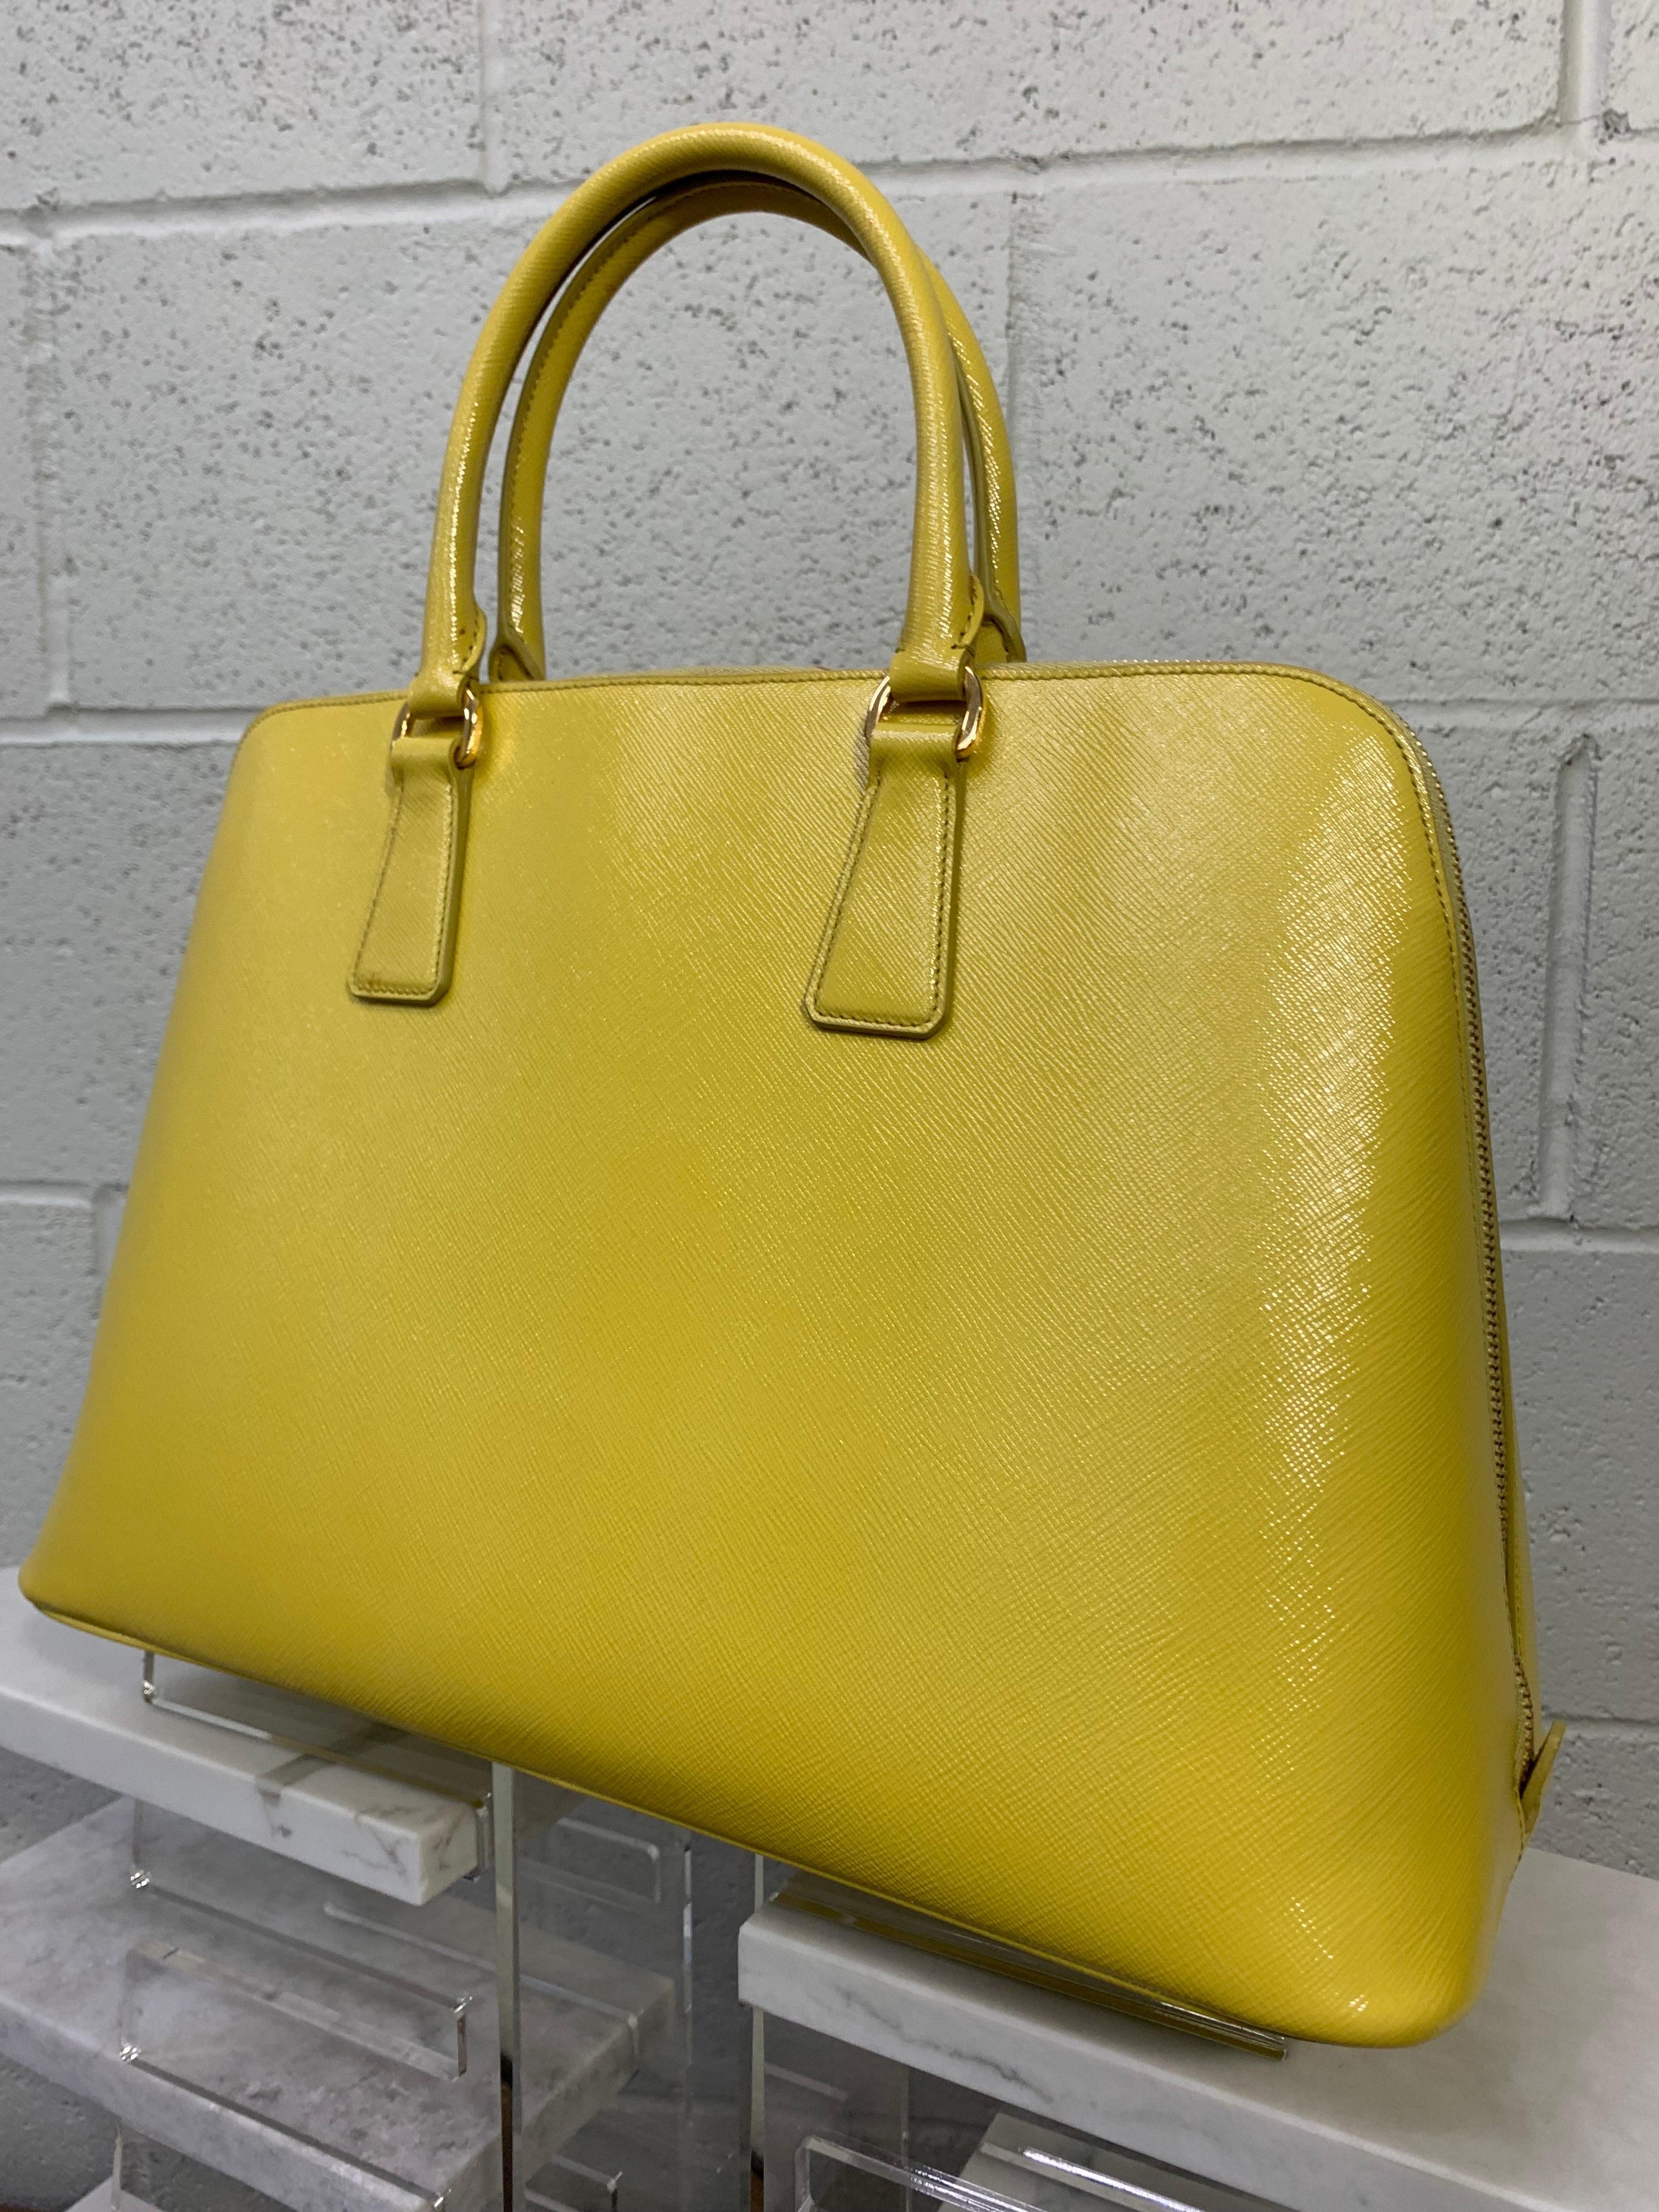 Contemporary Prada Pineapple Yellow Double-Sided Wedge-Shaped Leather Travel Bag In New Condition For Sale In Gresham, OR